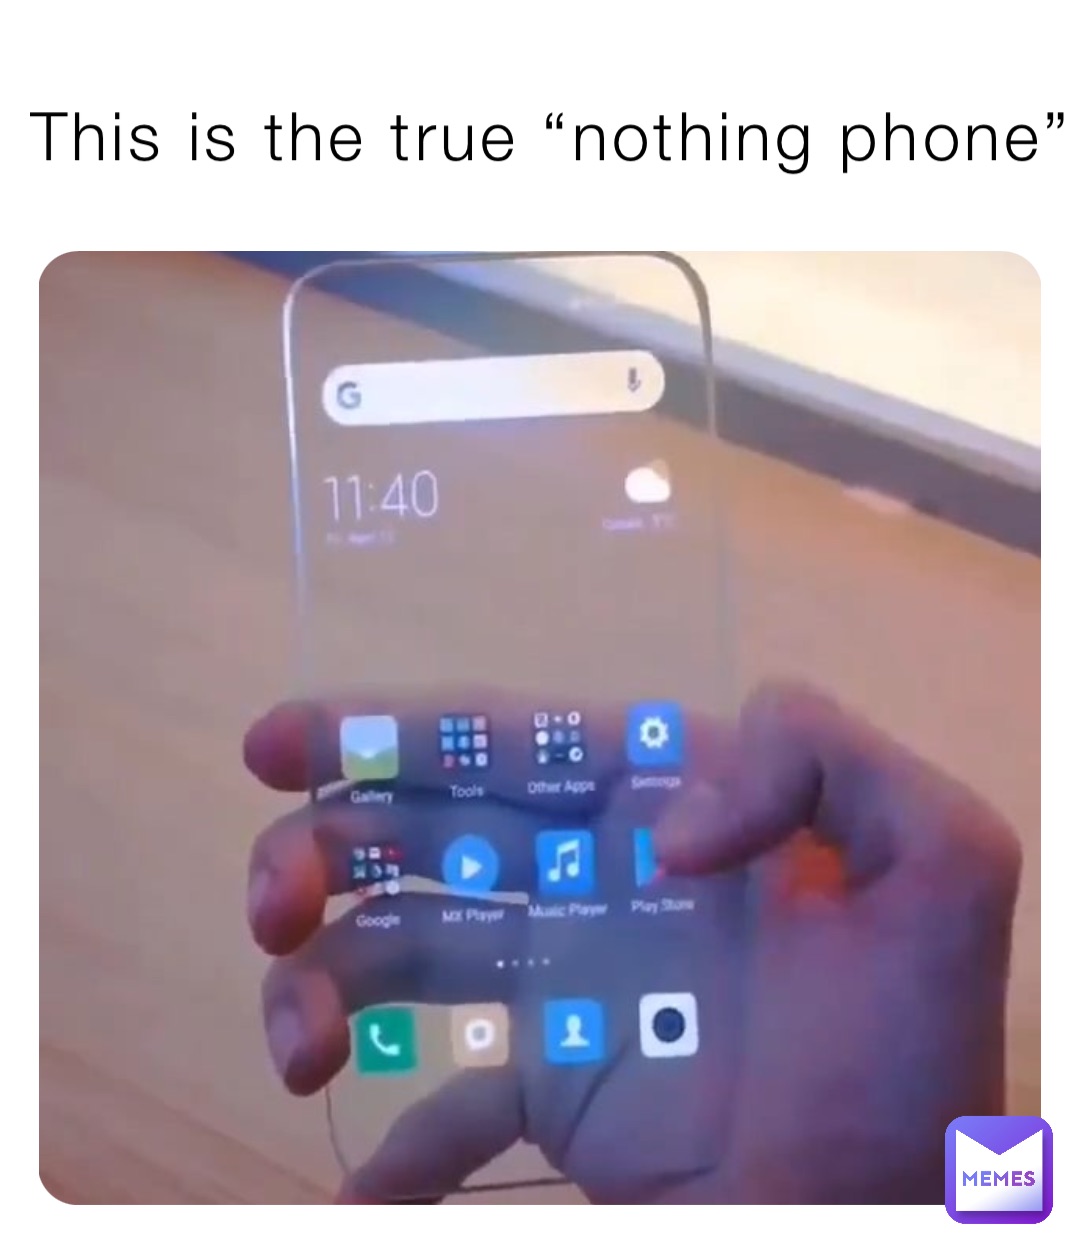 This is the true “nothing phone”